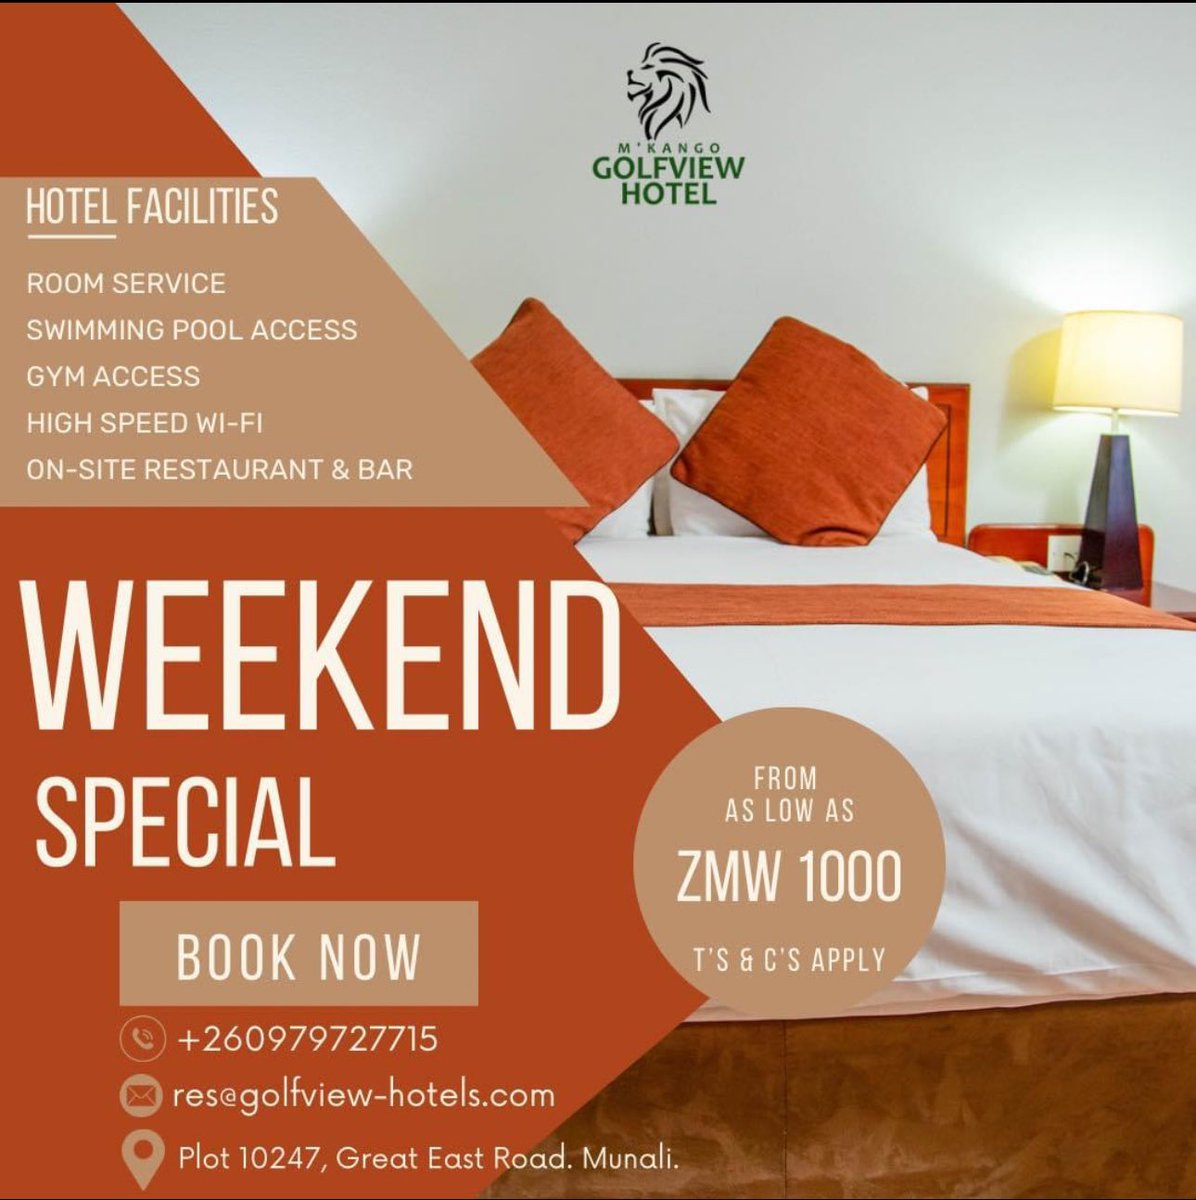 A little Staycation never hurt anybody. So pack up your weekend bag and check in with us. Email res@golfview-hotels.com or call +260979727715 more information. #servingyouwithpride #hotels #lusaka #2024Staycation #Mkango #Golfview #Zambia